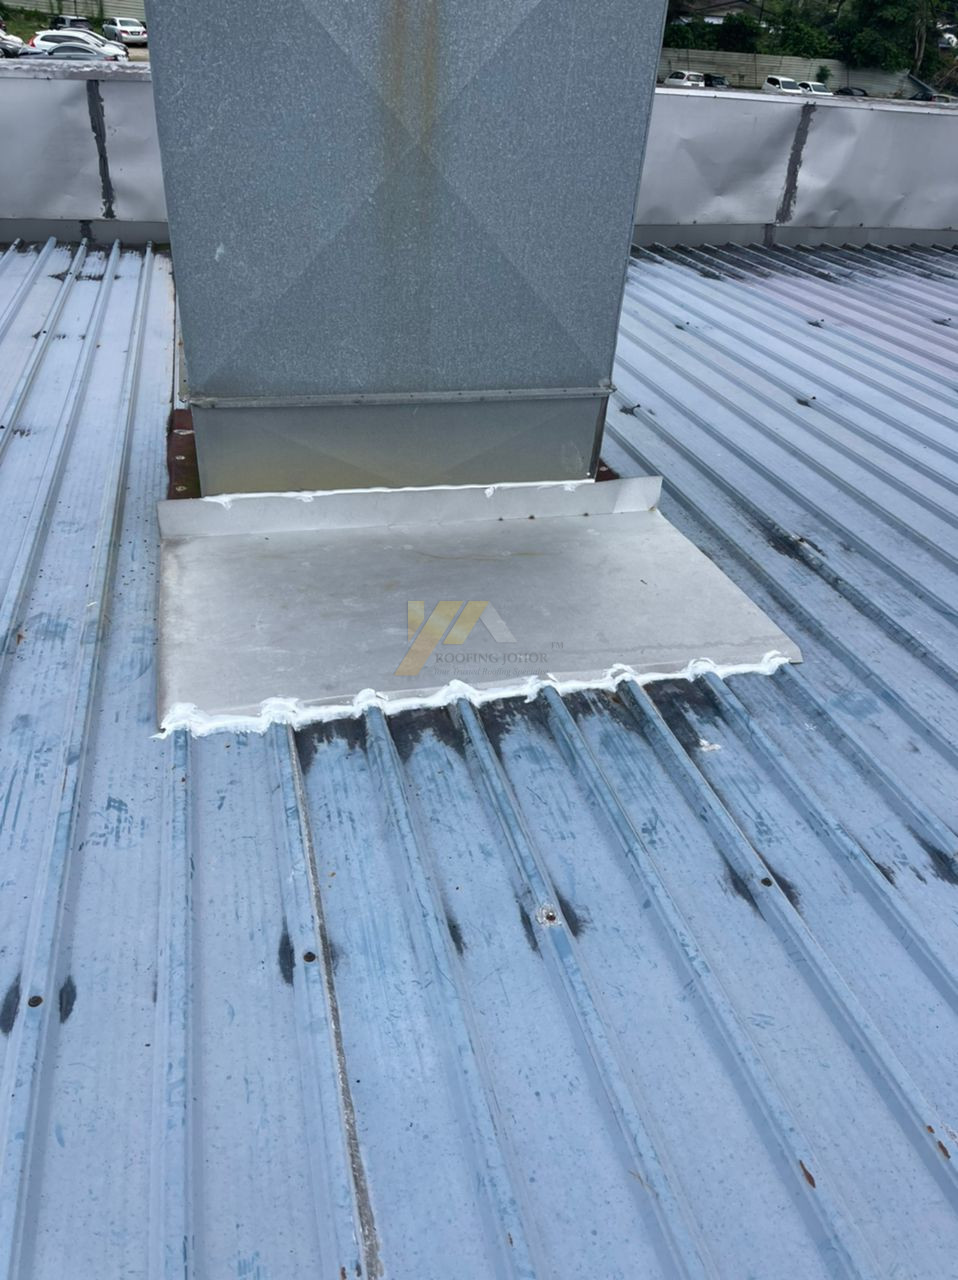 turbine zinc cover replace with stainless steel coveer